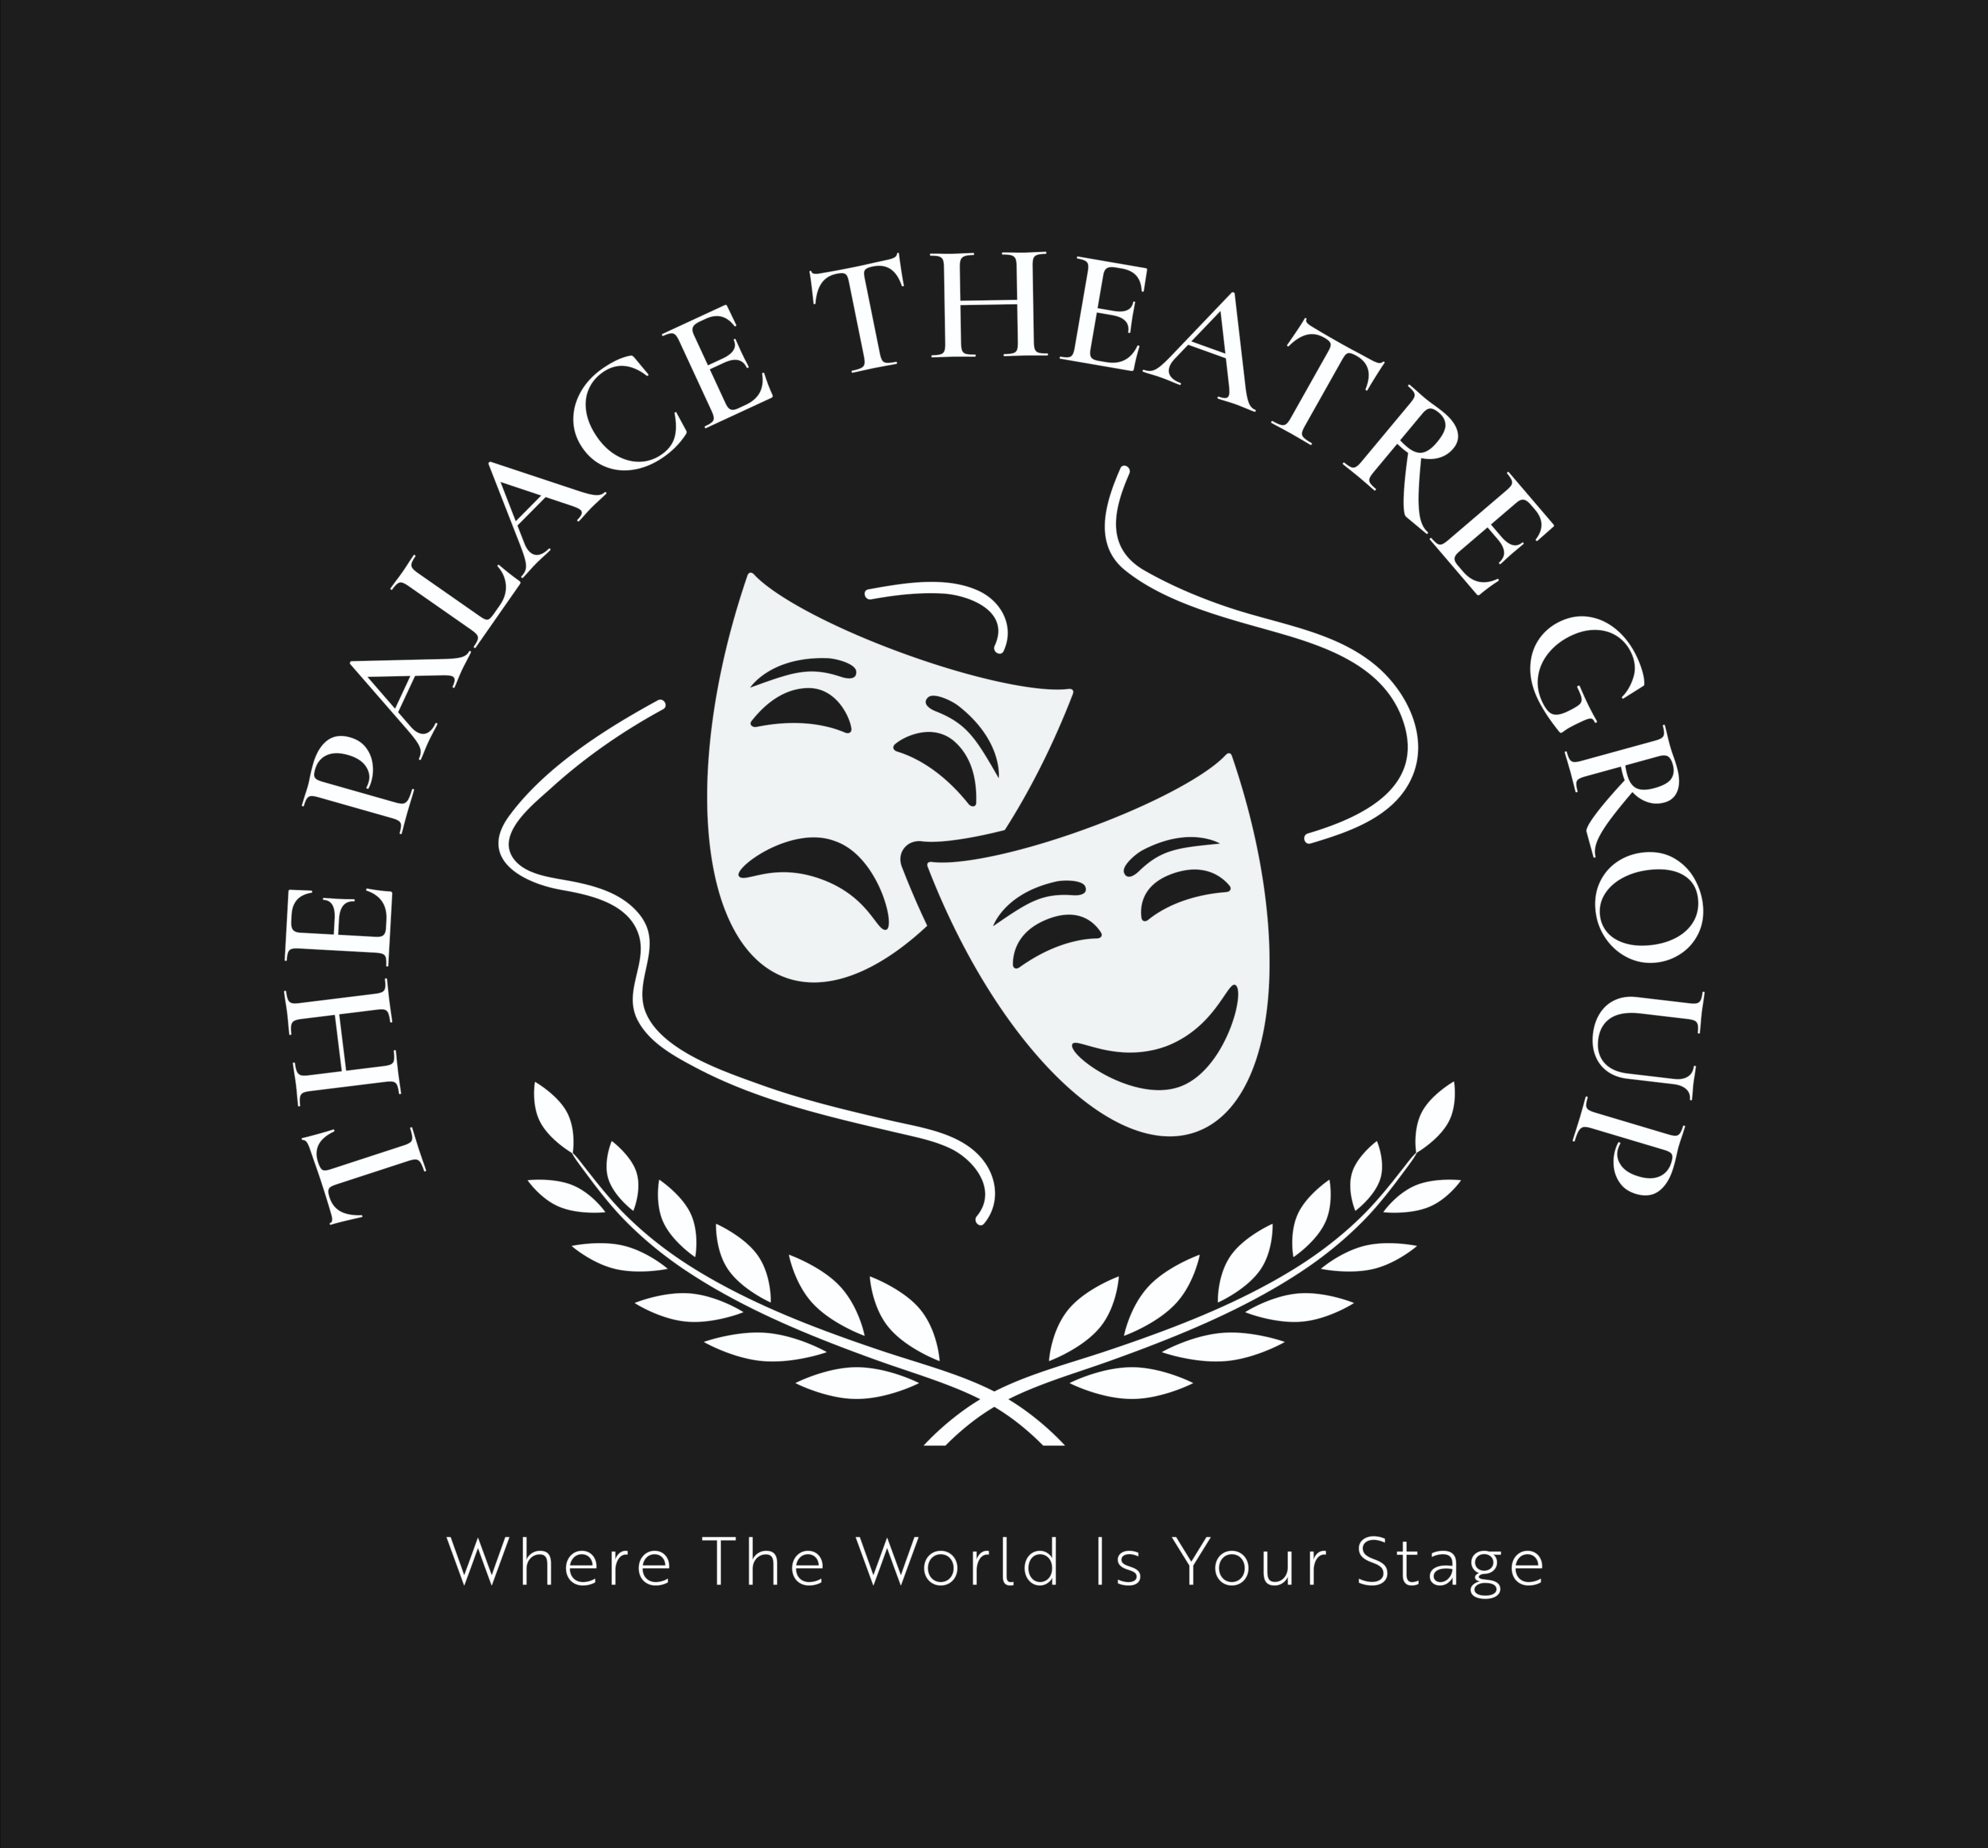 The Palace Theatre Group